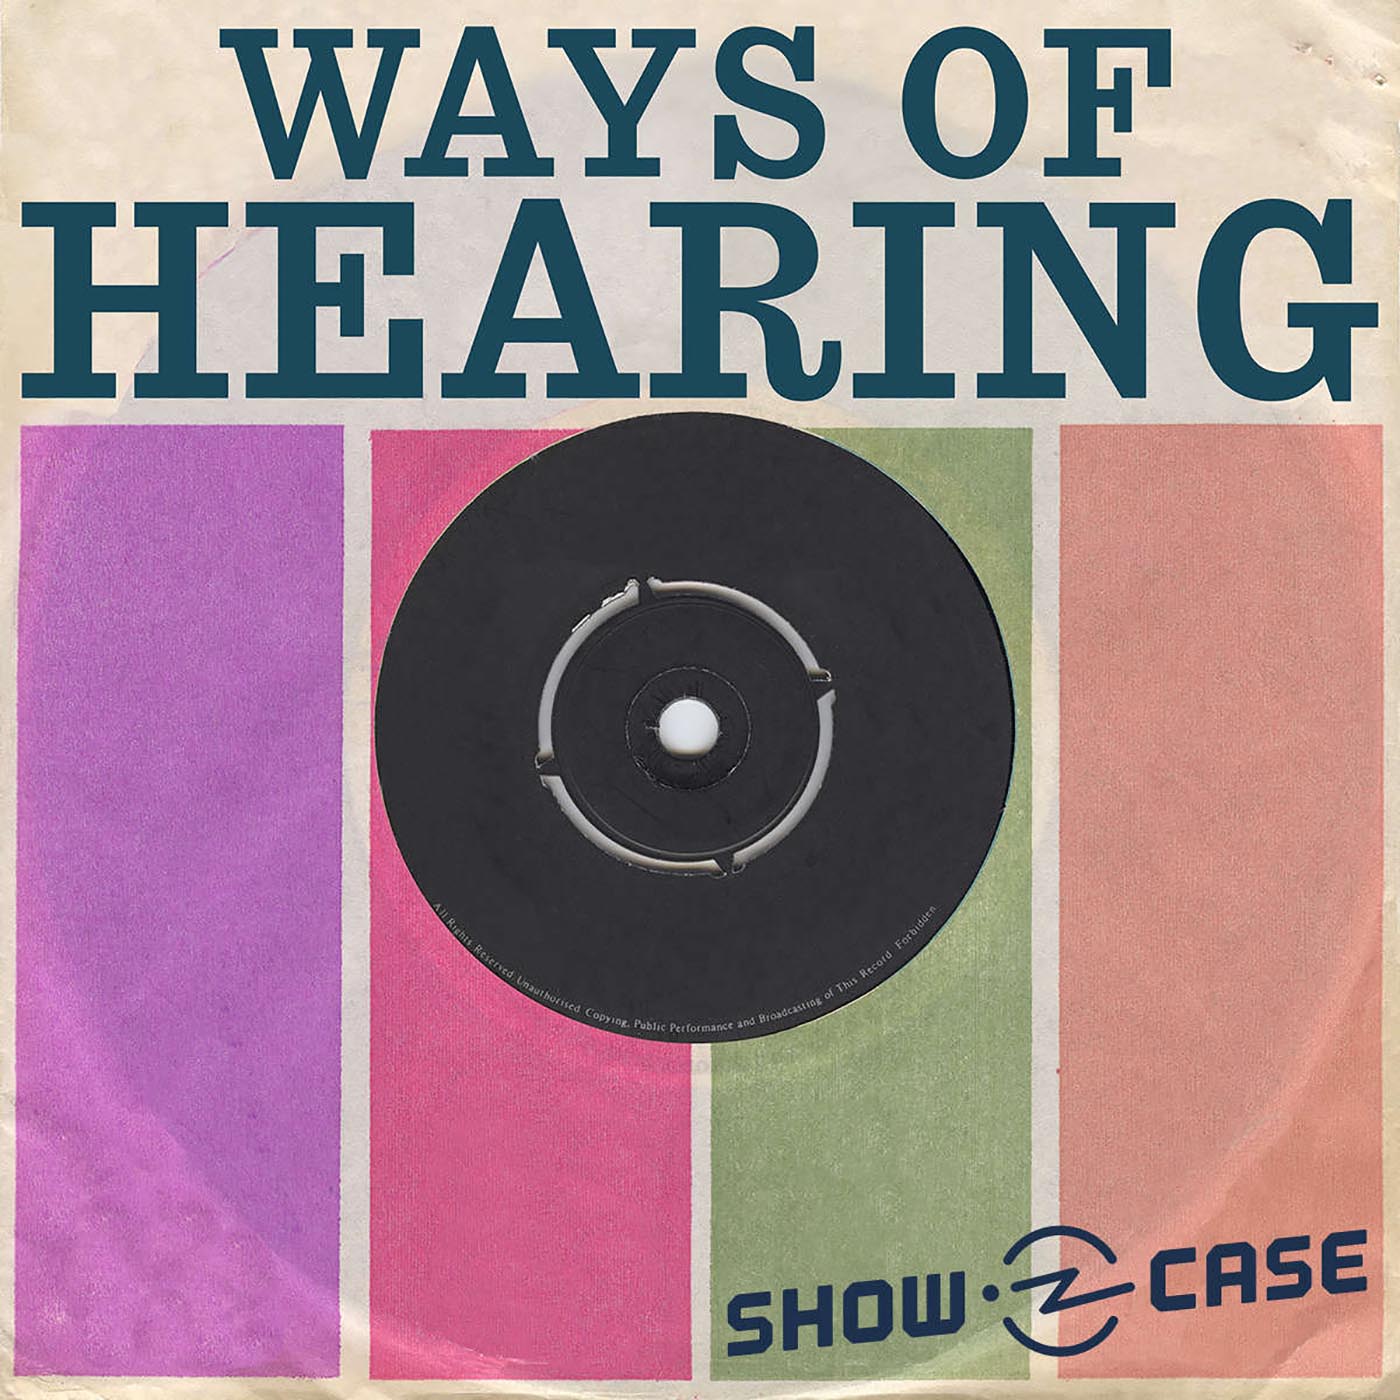 Ways of Hearing #2 – SPACE